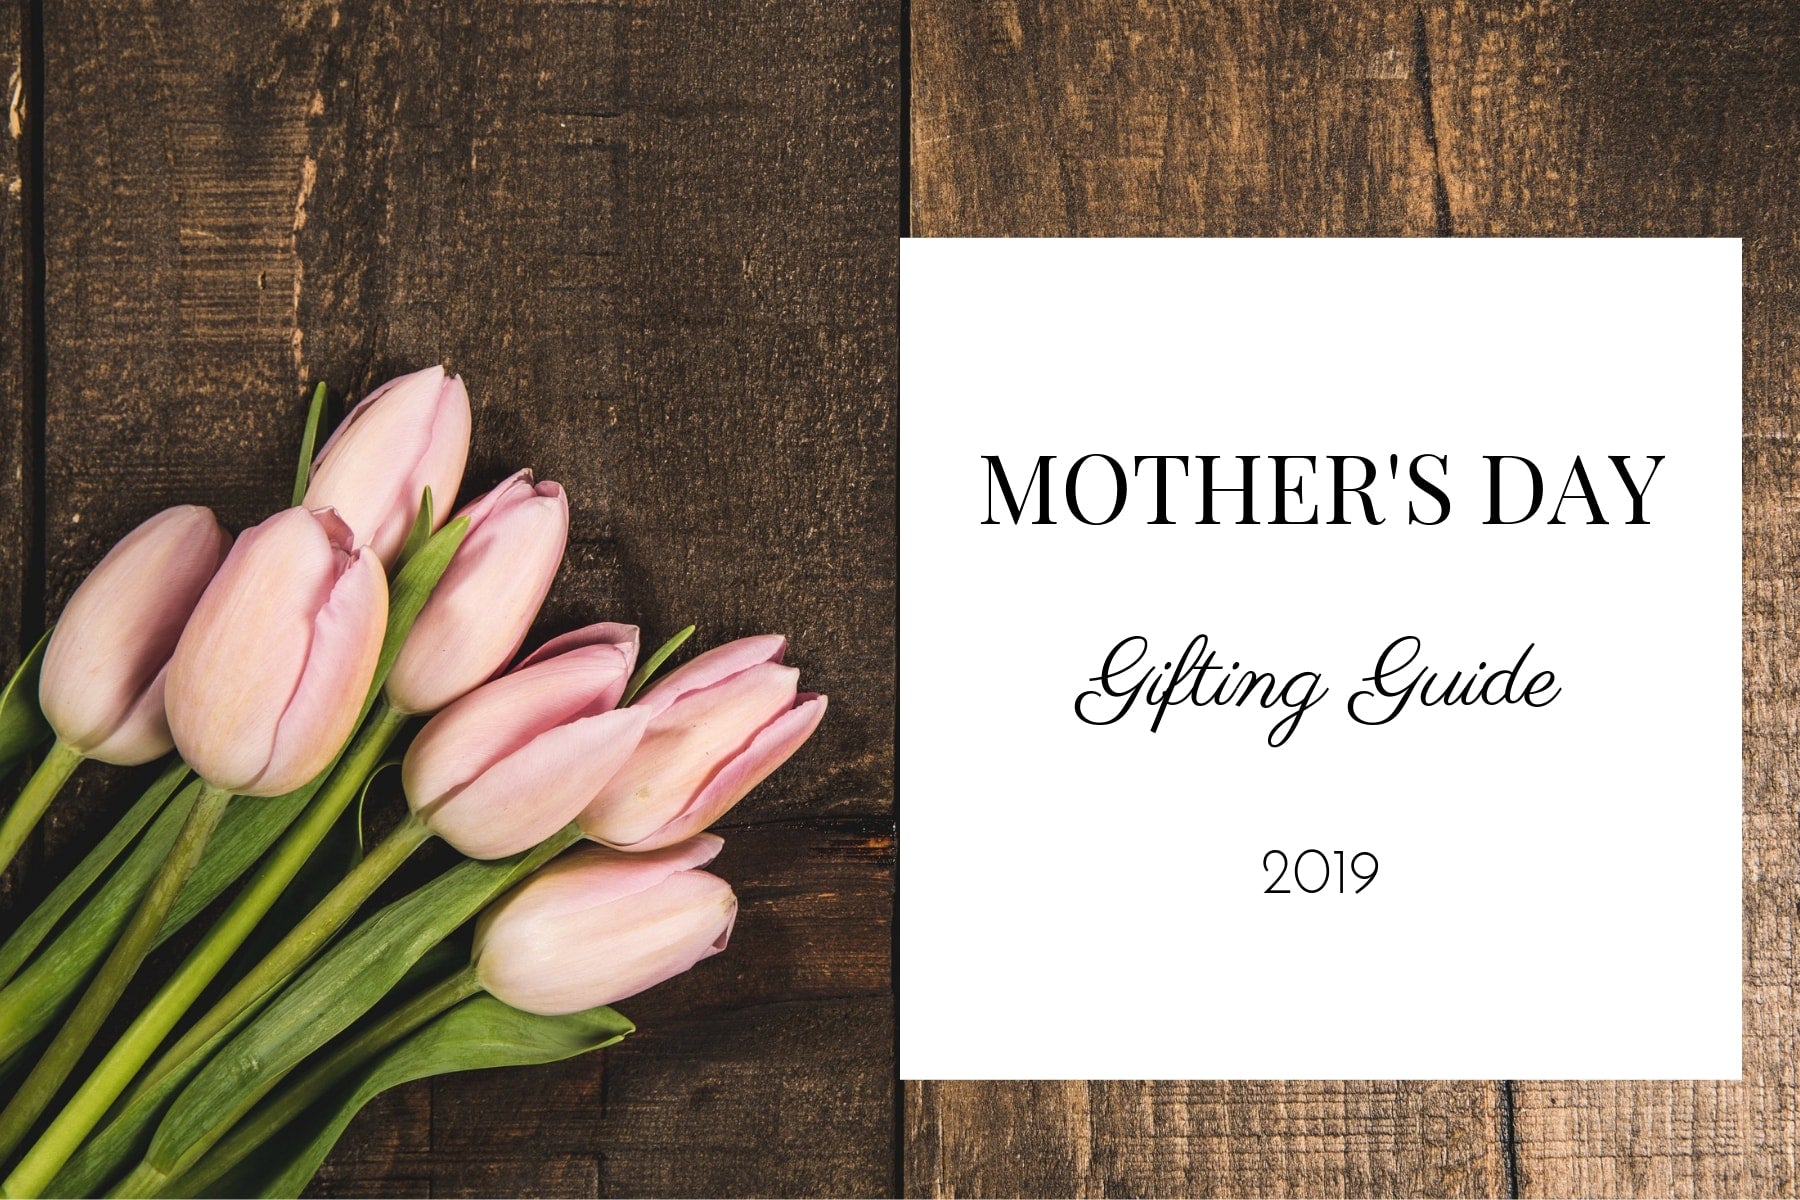 Home Artisan Mother's Day Gifting Guide 2019